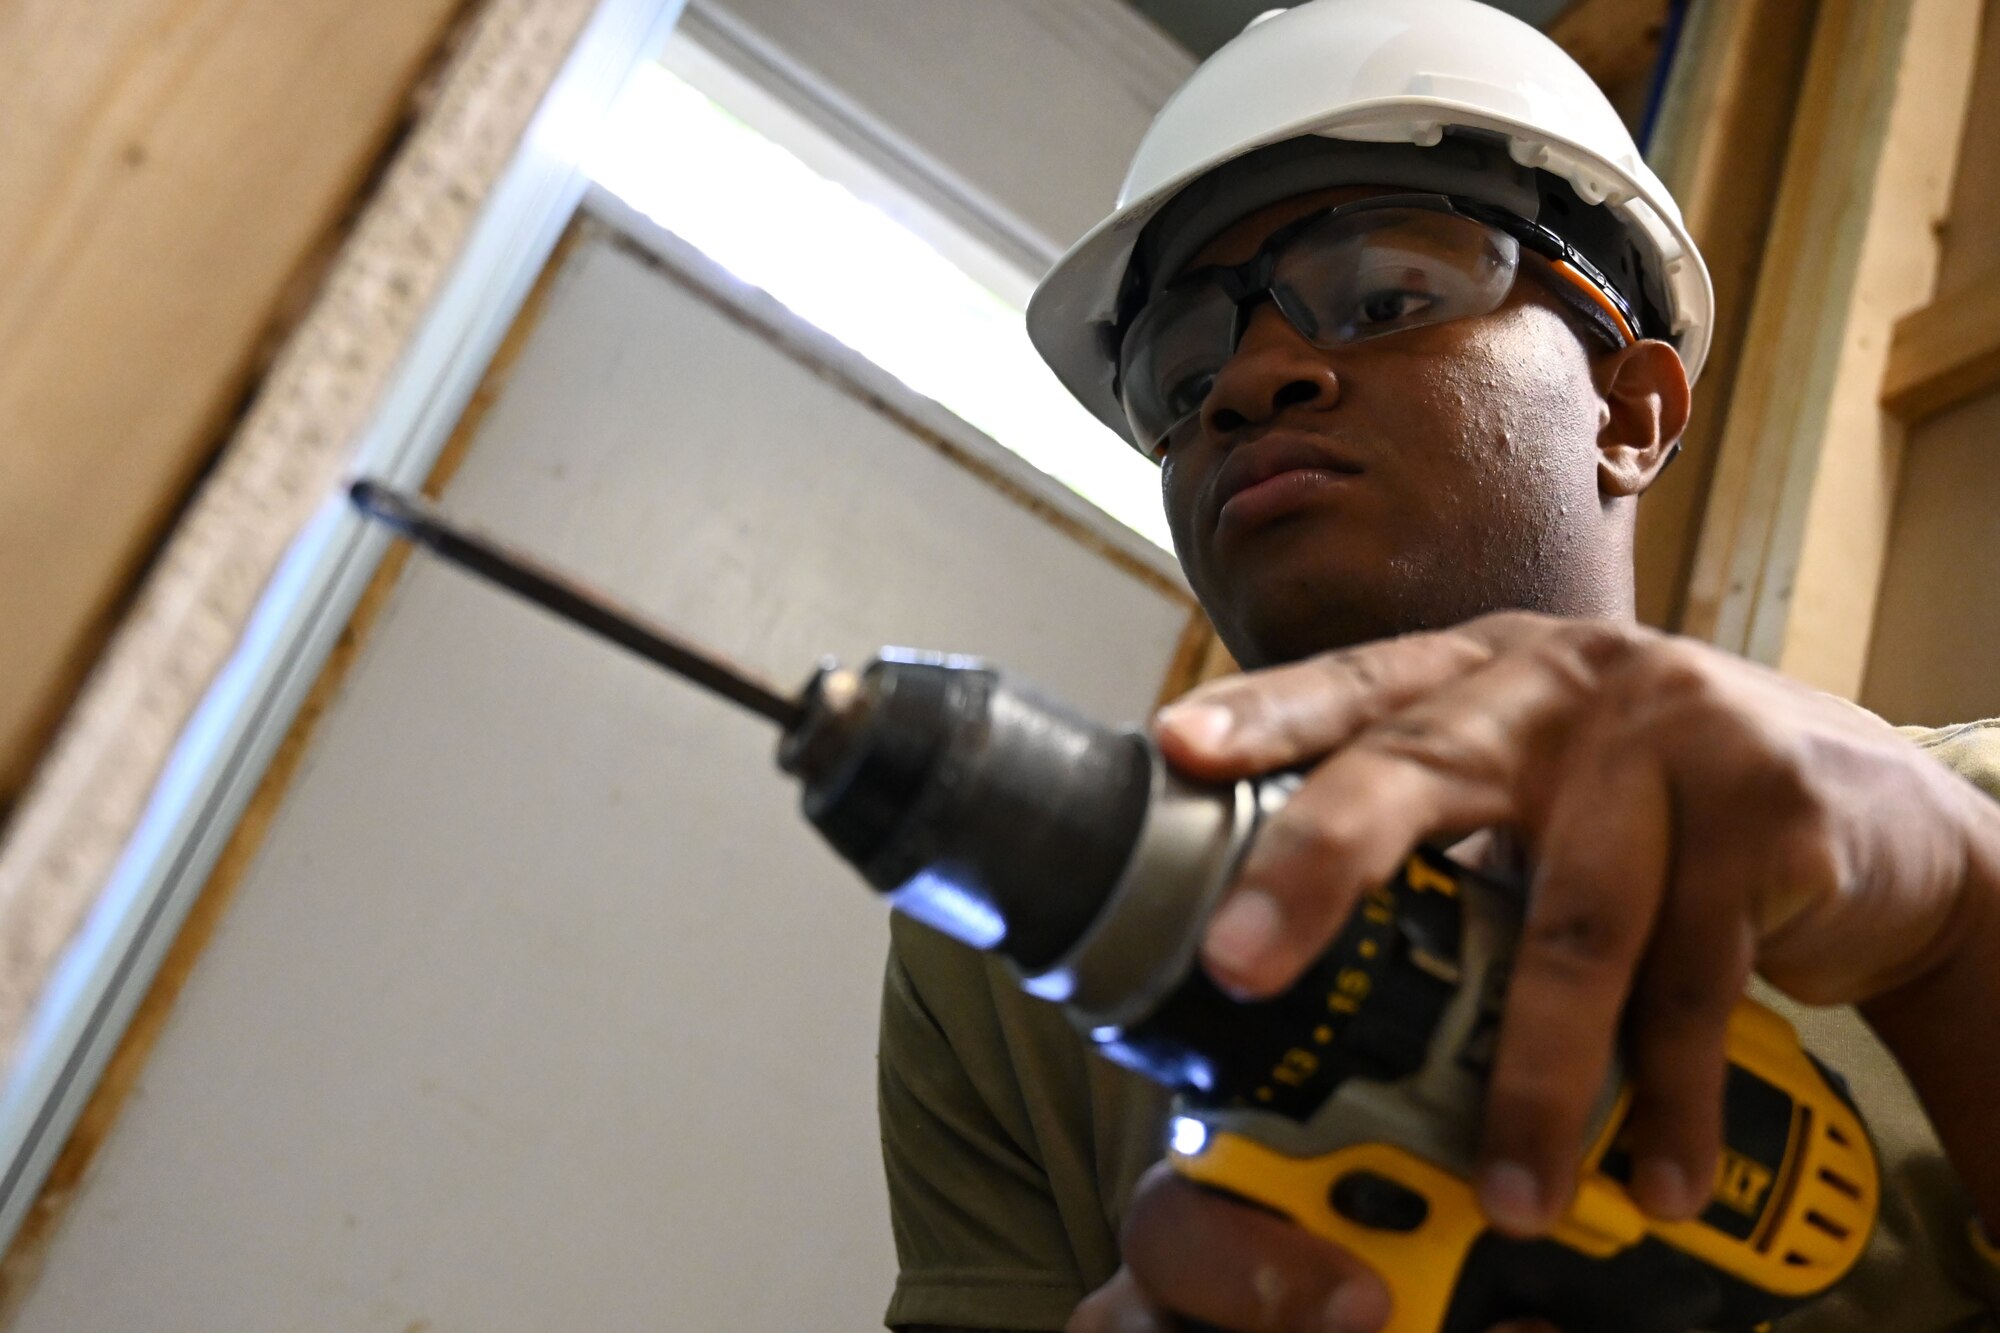 Photo of Airman using a drill.